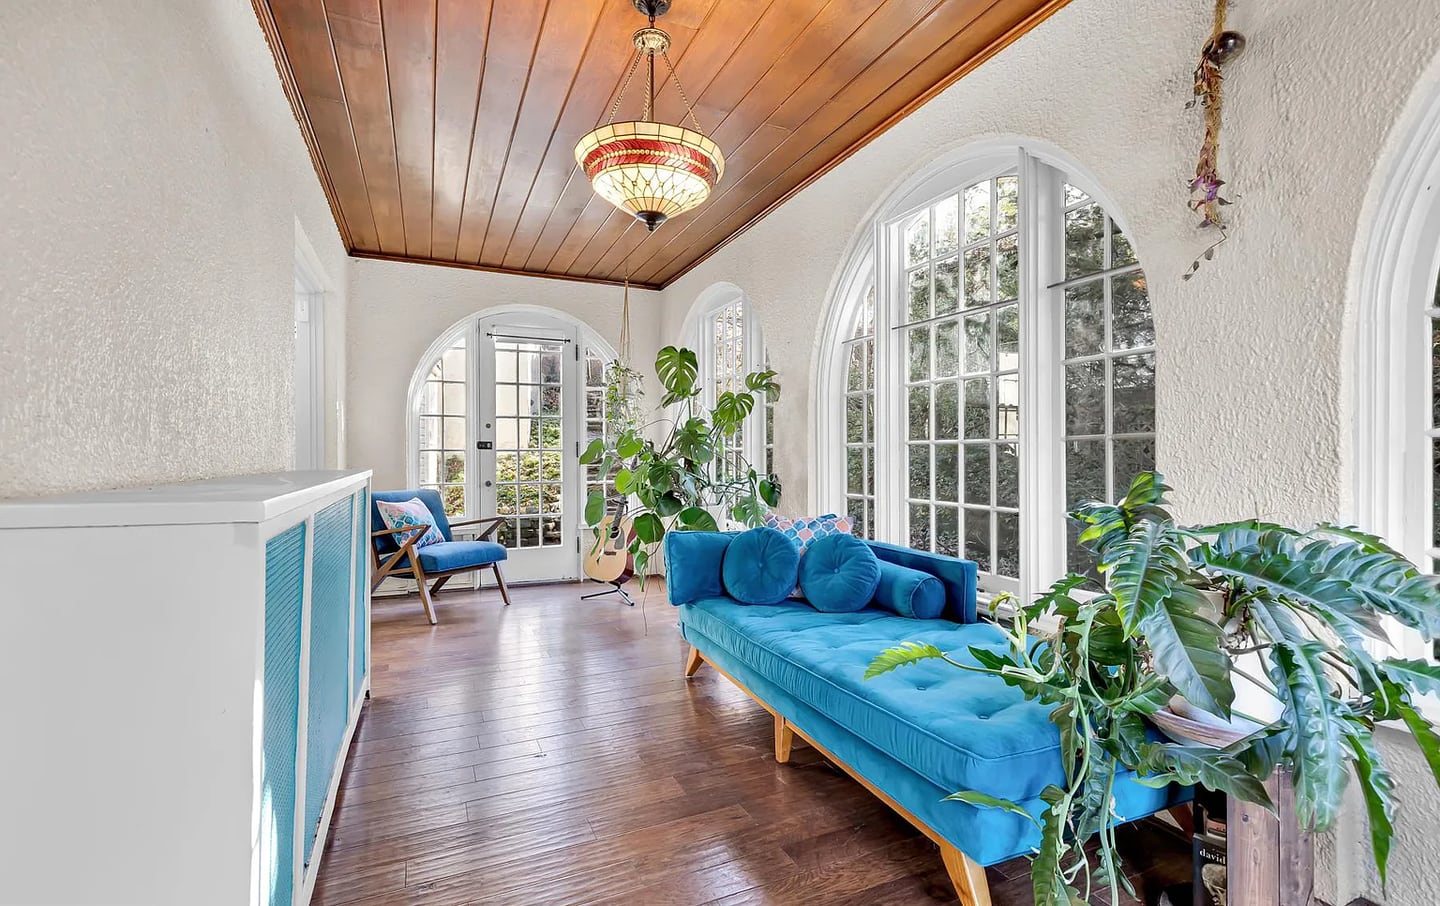 A bright sunroom with arched windows, dark wooden floors, a wood-stained ceiling and bright blue furniture.